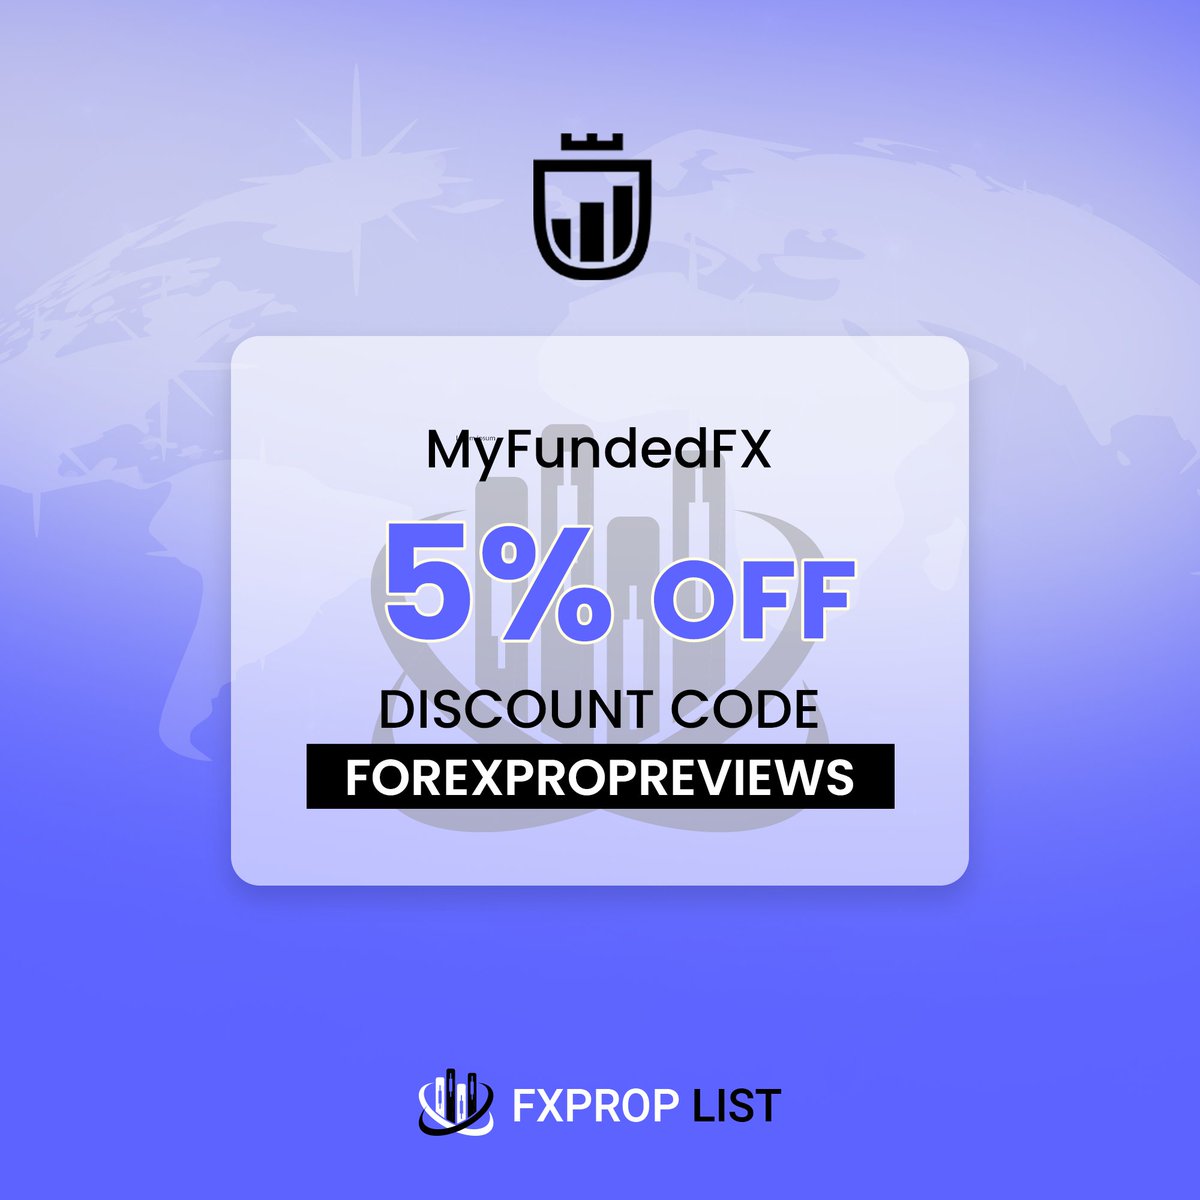 Take advantage of this incredible opportunity with MyFundedFX! 🚀 Get a 5% discount using code 'FOREXPROPREVIEWS'. Upgrade your trading journey now! 🌟
#MyFundedFX #LimitedOffer #Trading #Discount